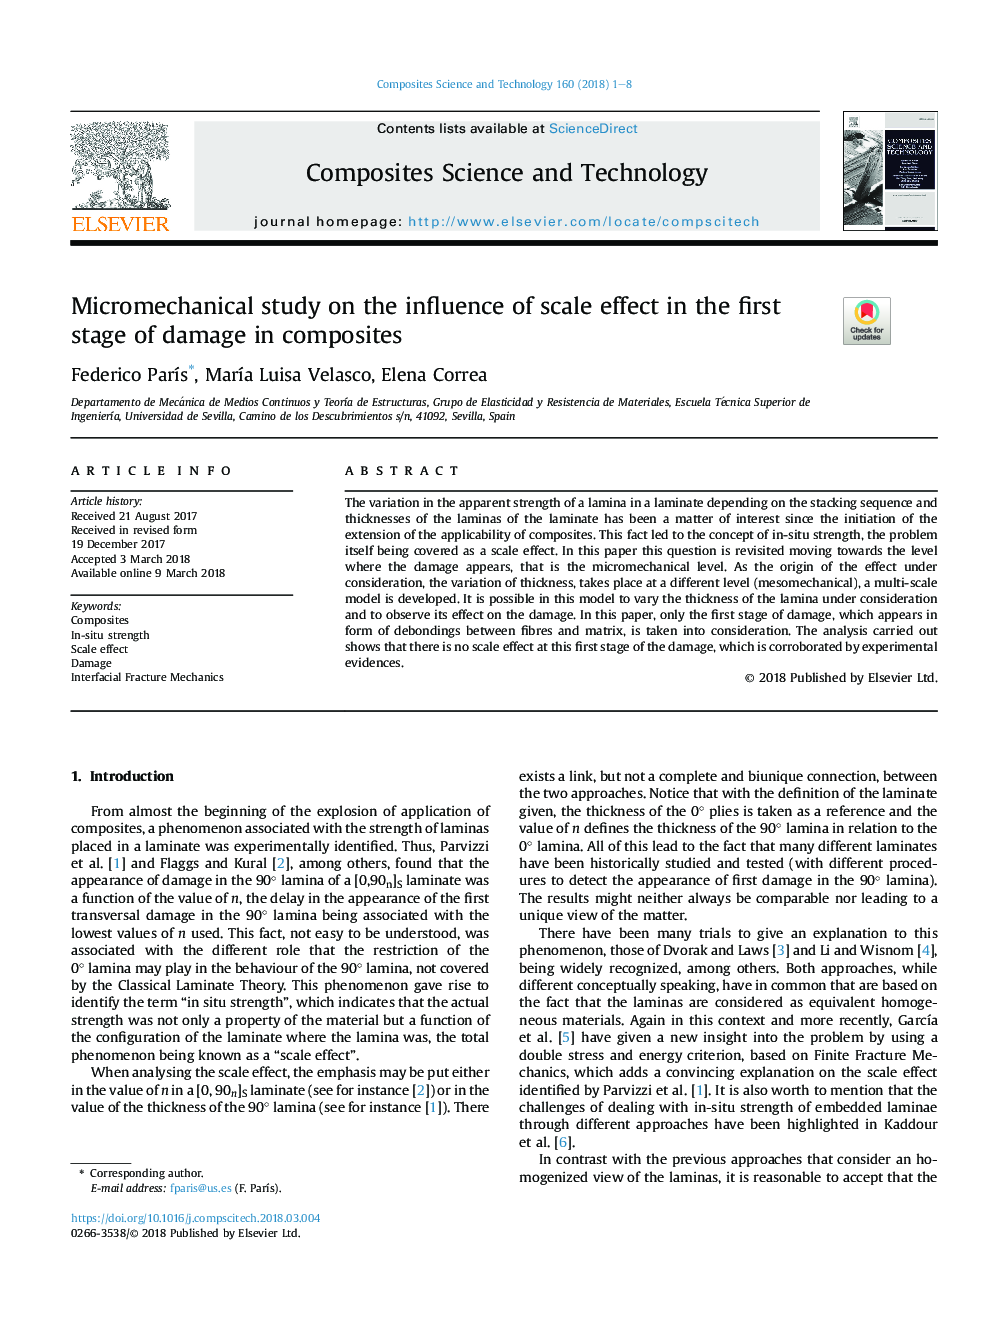 Micromechanical study on the influence of scale effect in the first stage of damage in composites